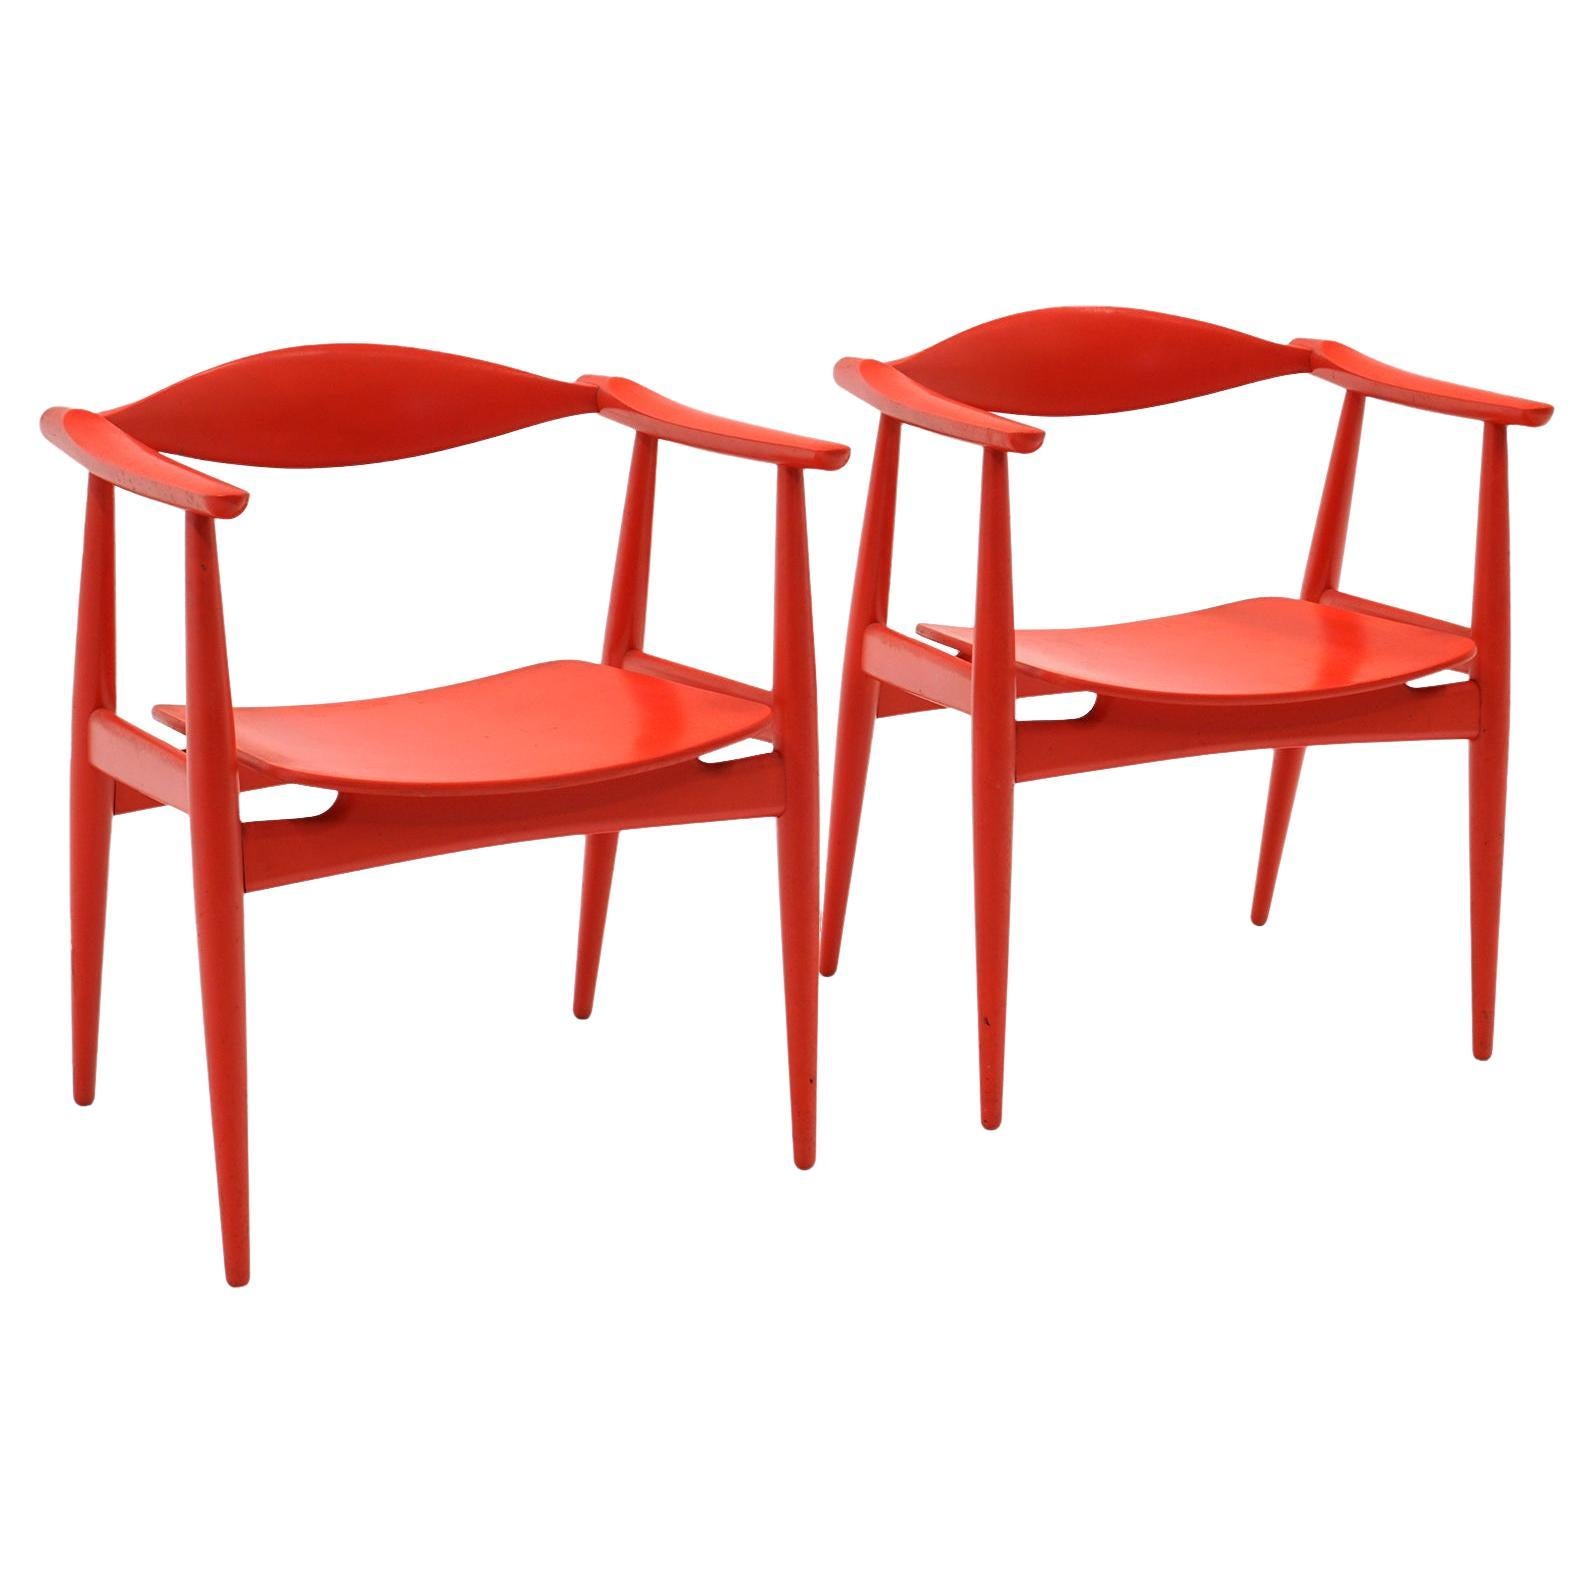 Rare Pair of Red Hans Wegner Arm Chairs for Hansen and Son. Original. Signed. For Sale